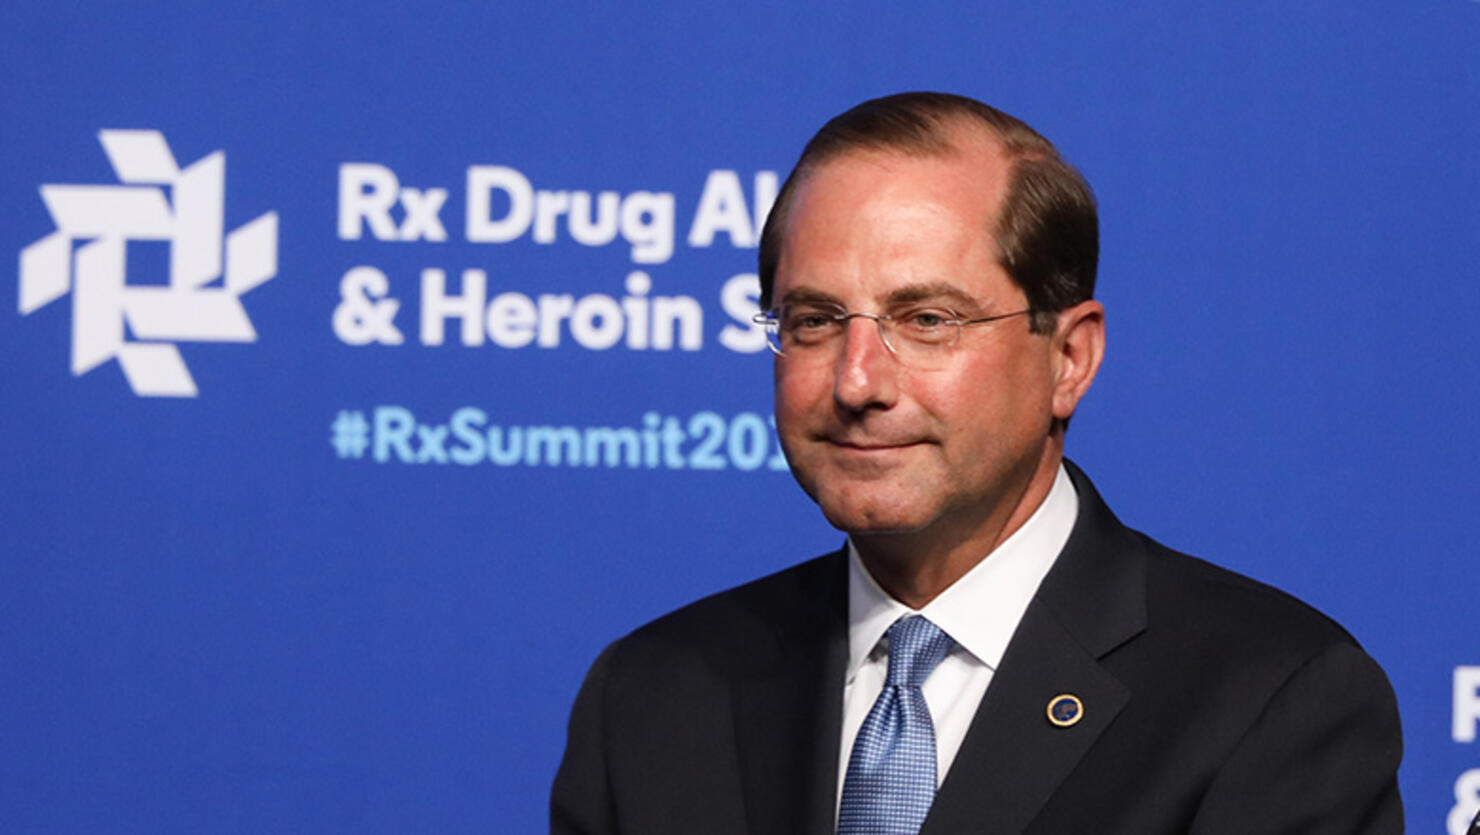 Alex Azar, Secretary of Health and Human Services attends the Rx Drug Abuse & Heroin Summit